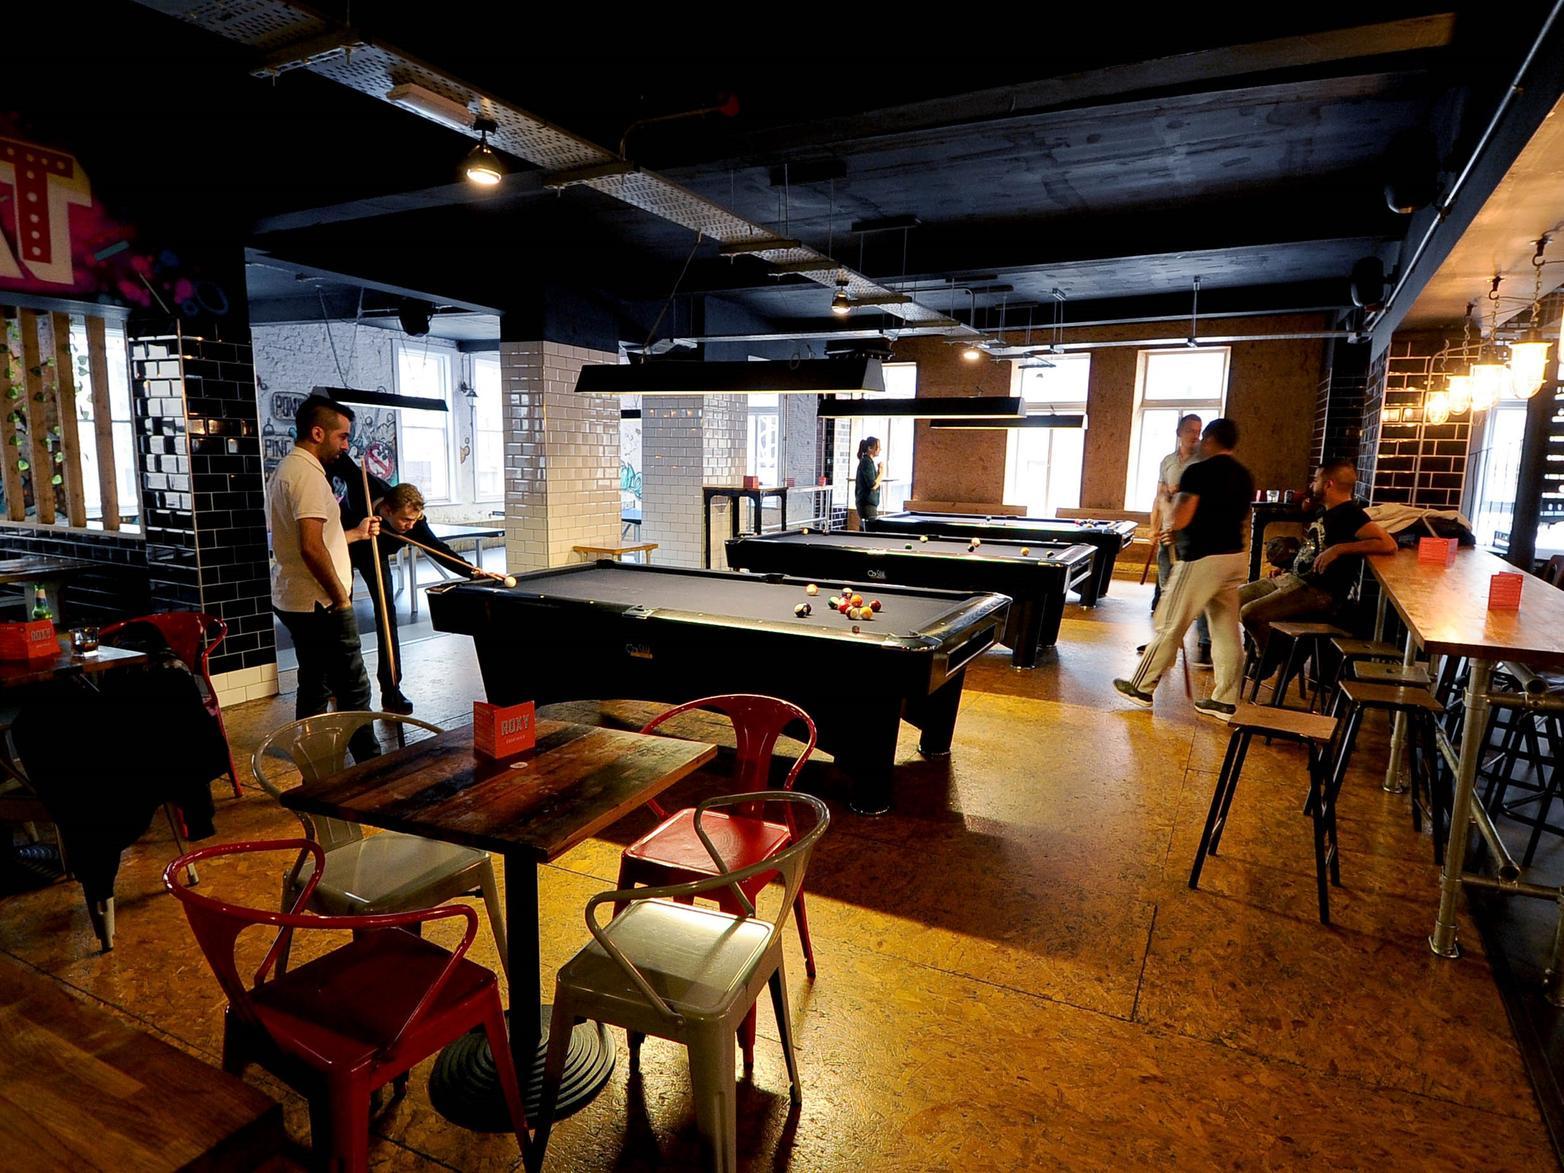 Unleash your competitive side and challenge your date to a game of pool, ping pong or mini golf at Roxy Ball Room and enjoy some fun-filled time together, with prices starting at 6.00 GBP each.